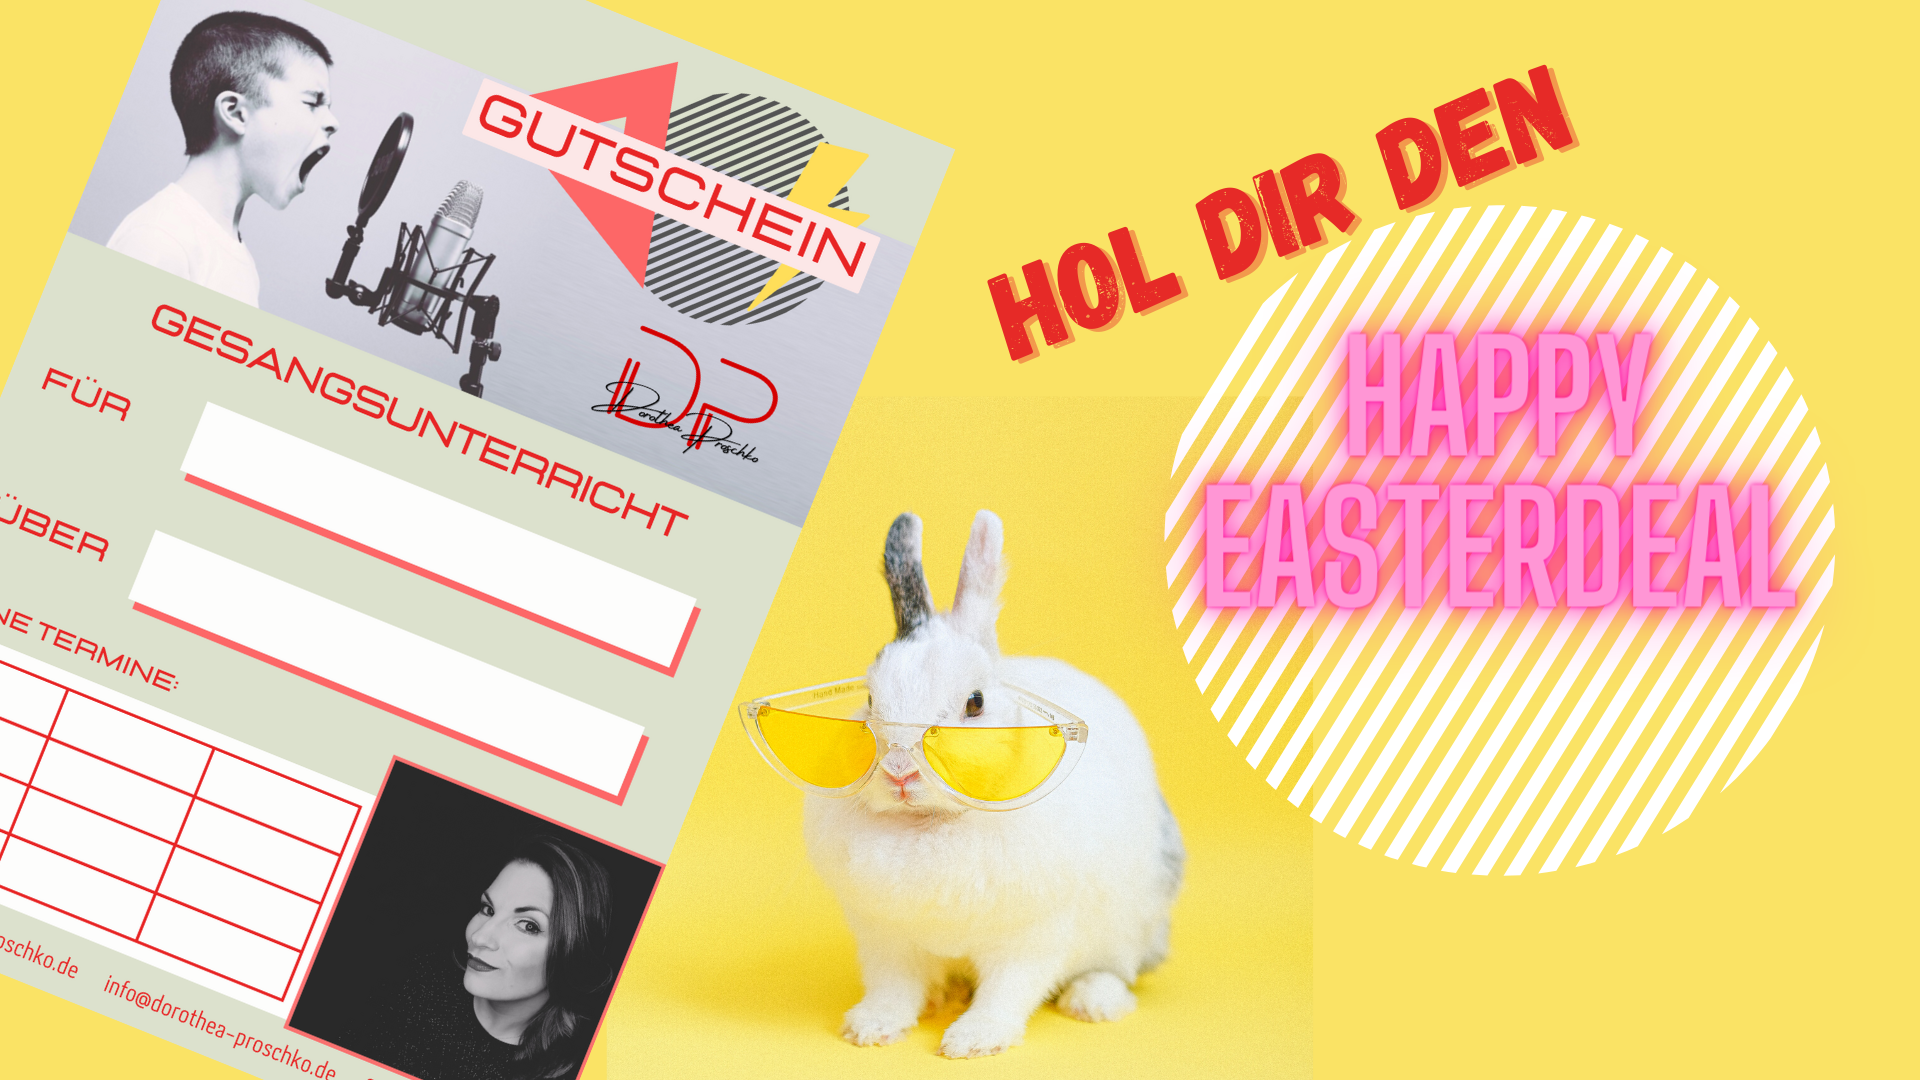 You are currently viewing Happy Easterdeal!